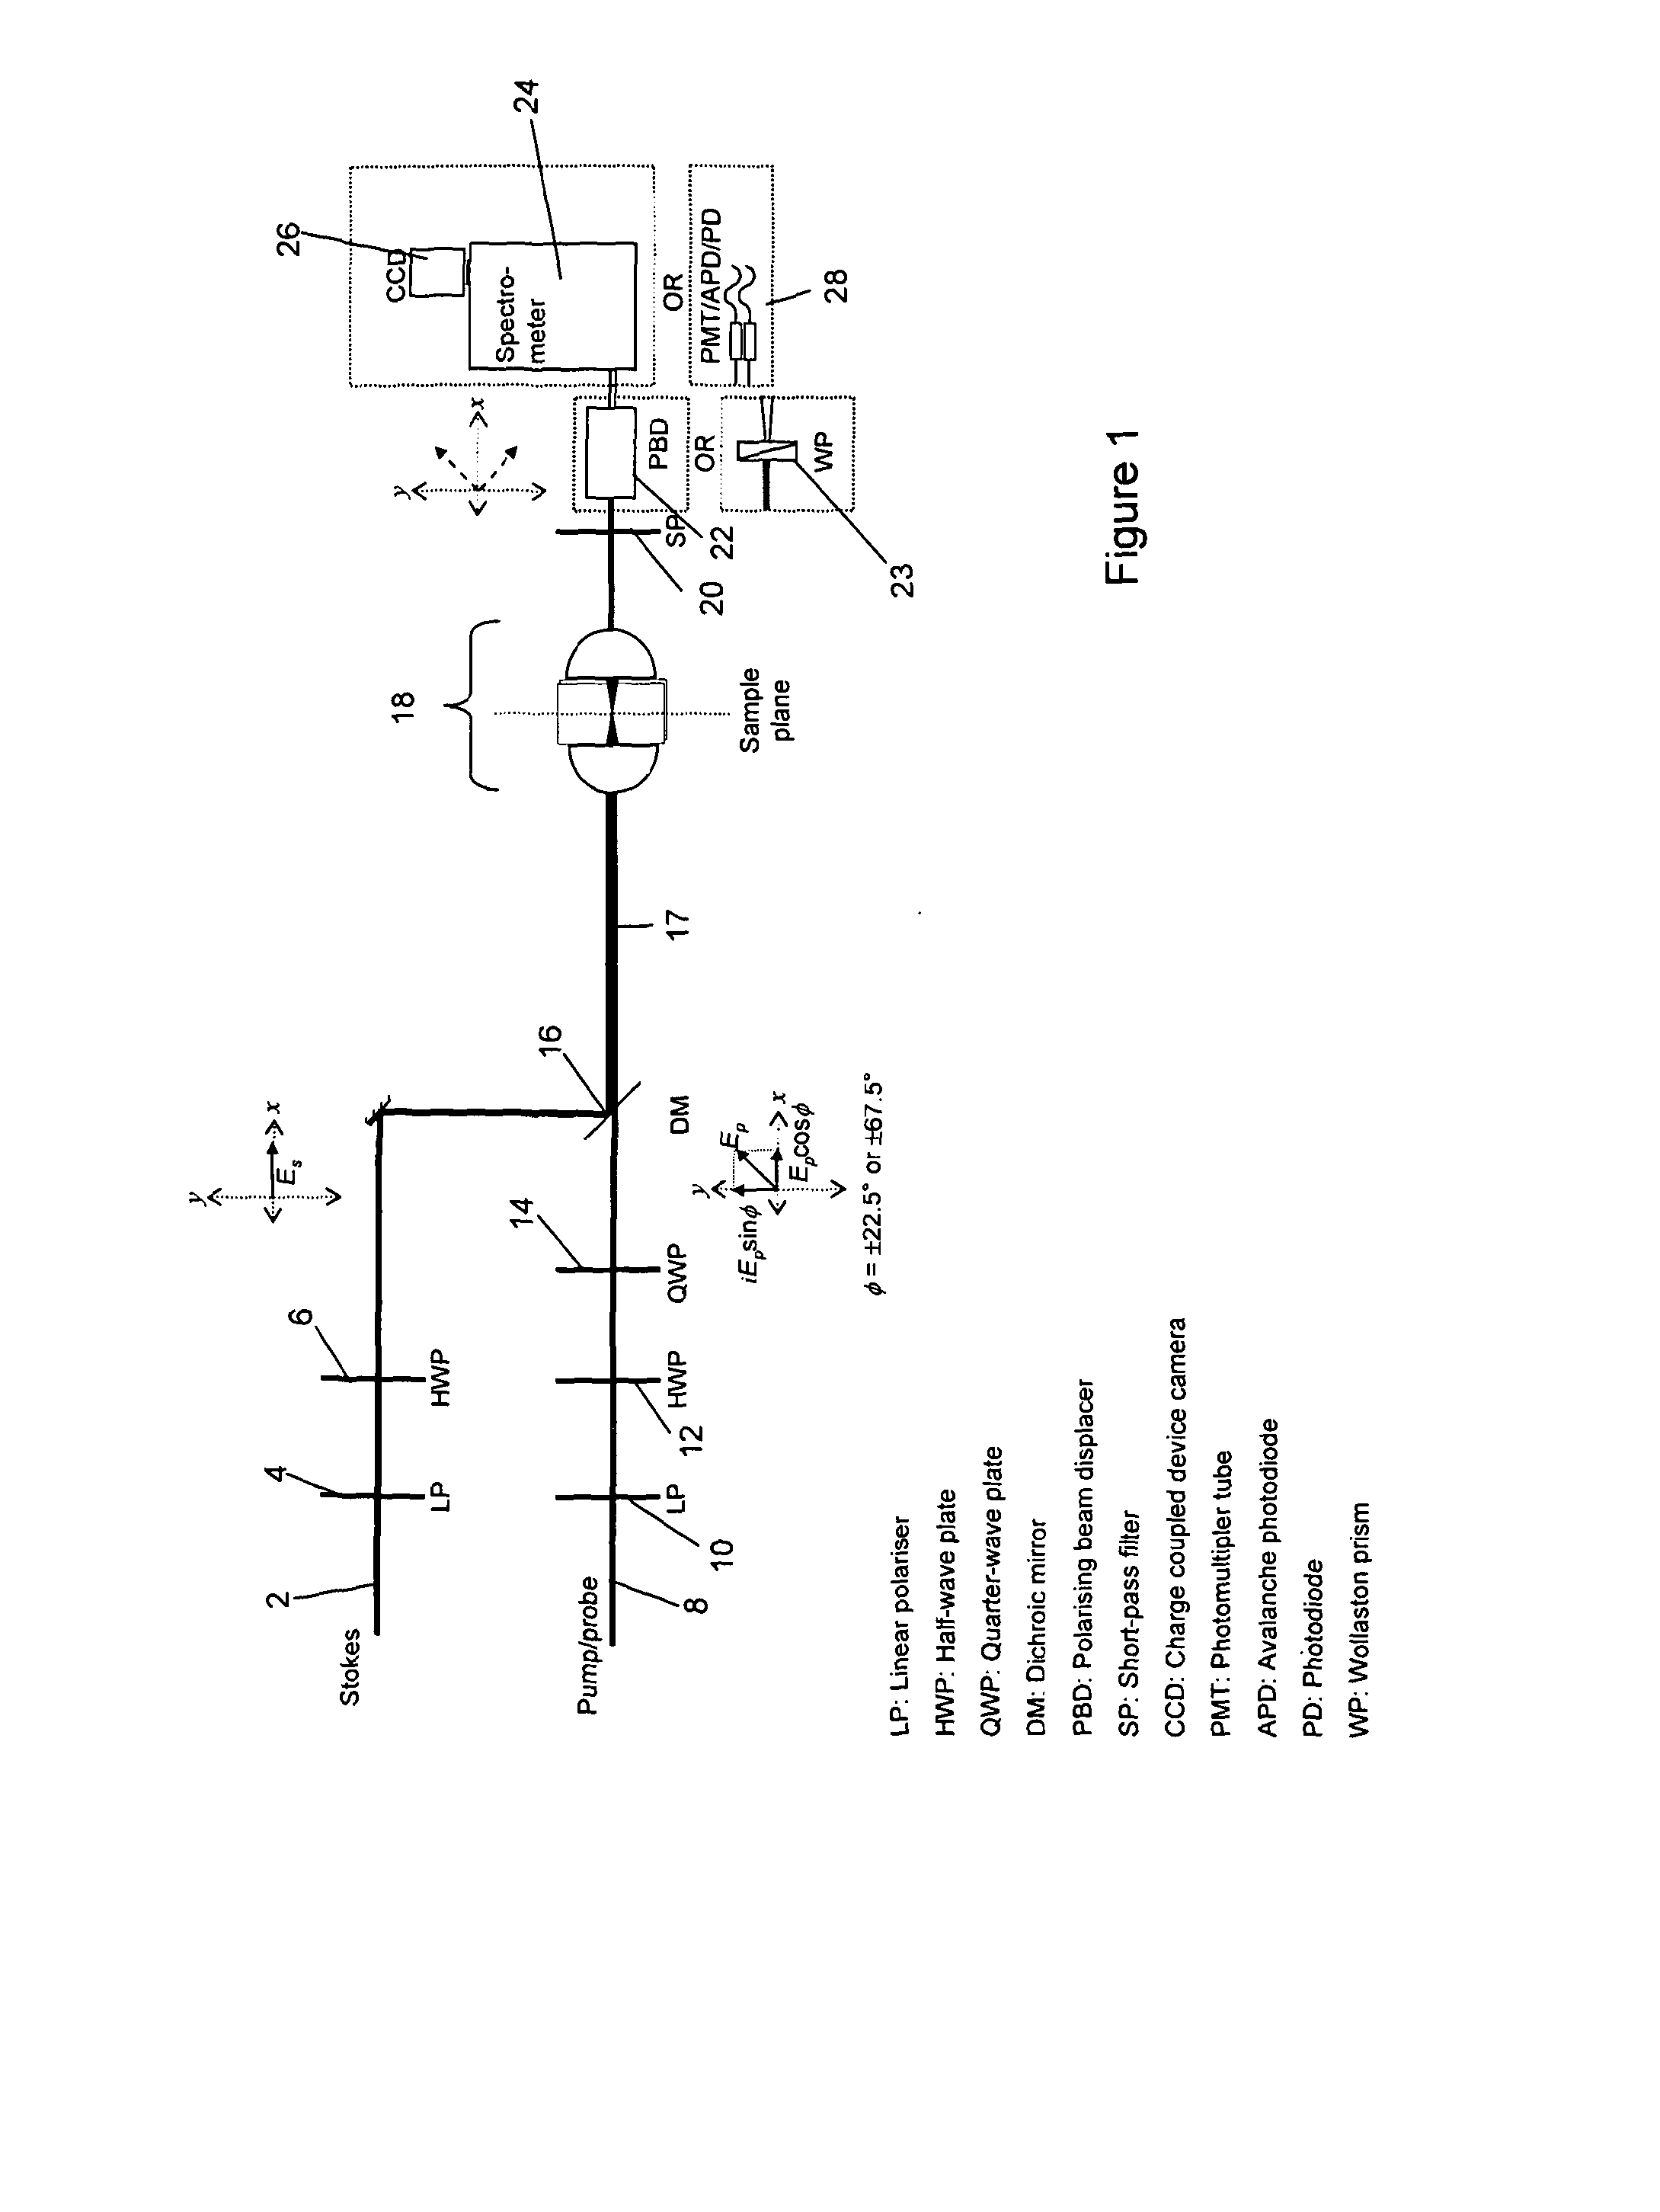 Method and apparatus for non-resonant background reduction in coherent Anti-stokes raman scattering (CARS) spectroscopy